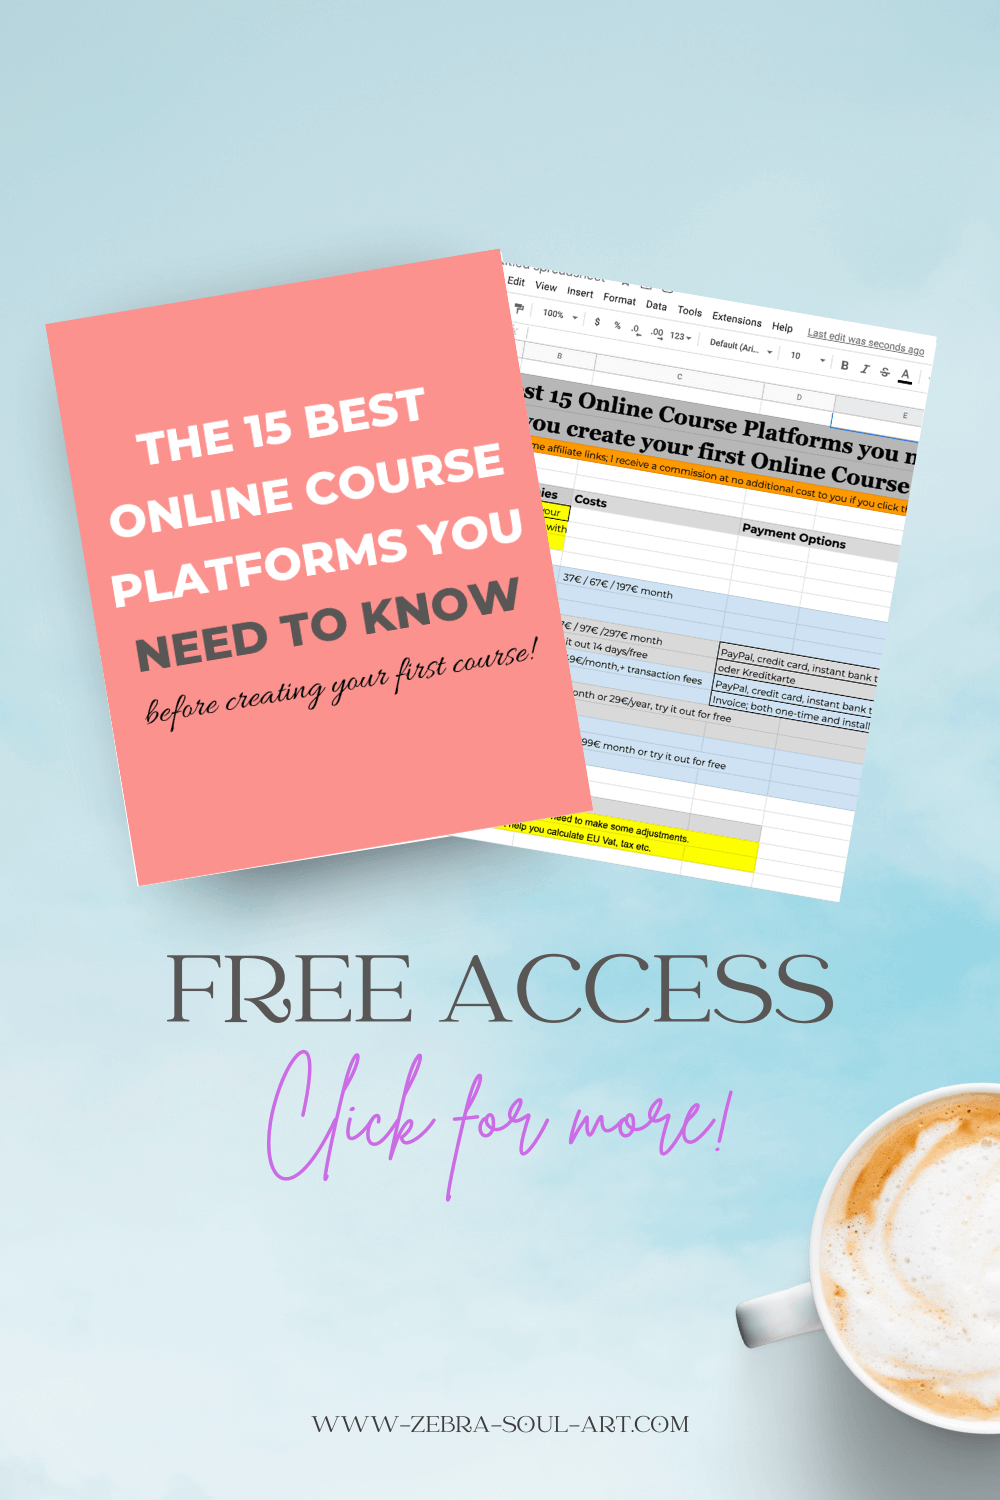 /the-best-15-online-course-platforms-you-need-to-know-before-you-start-your-first-online-course